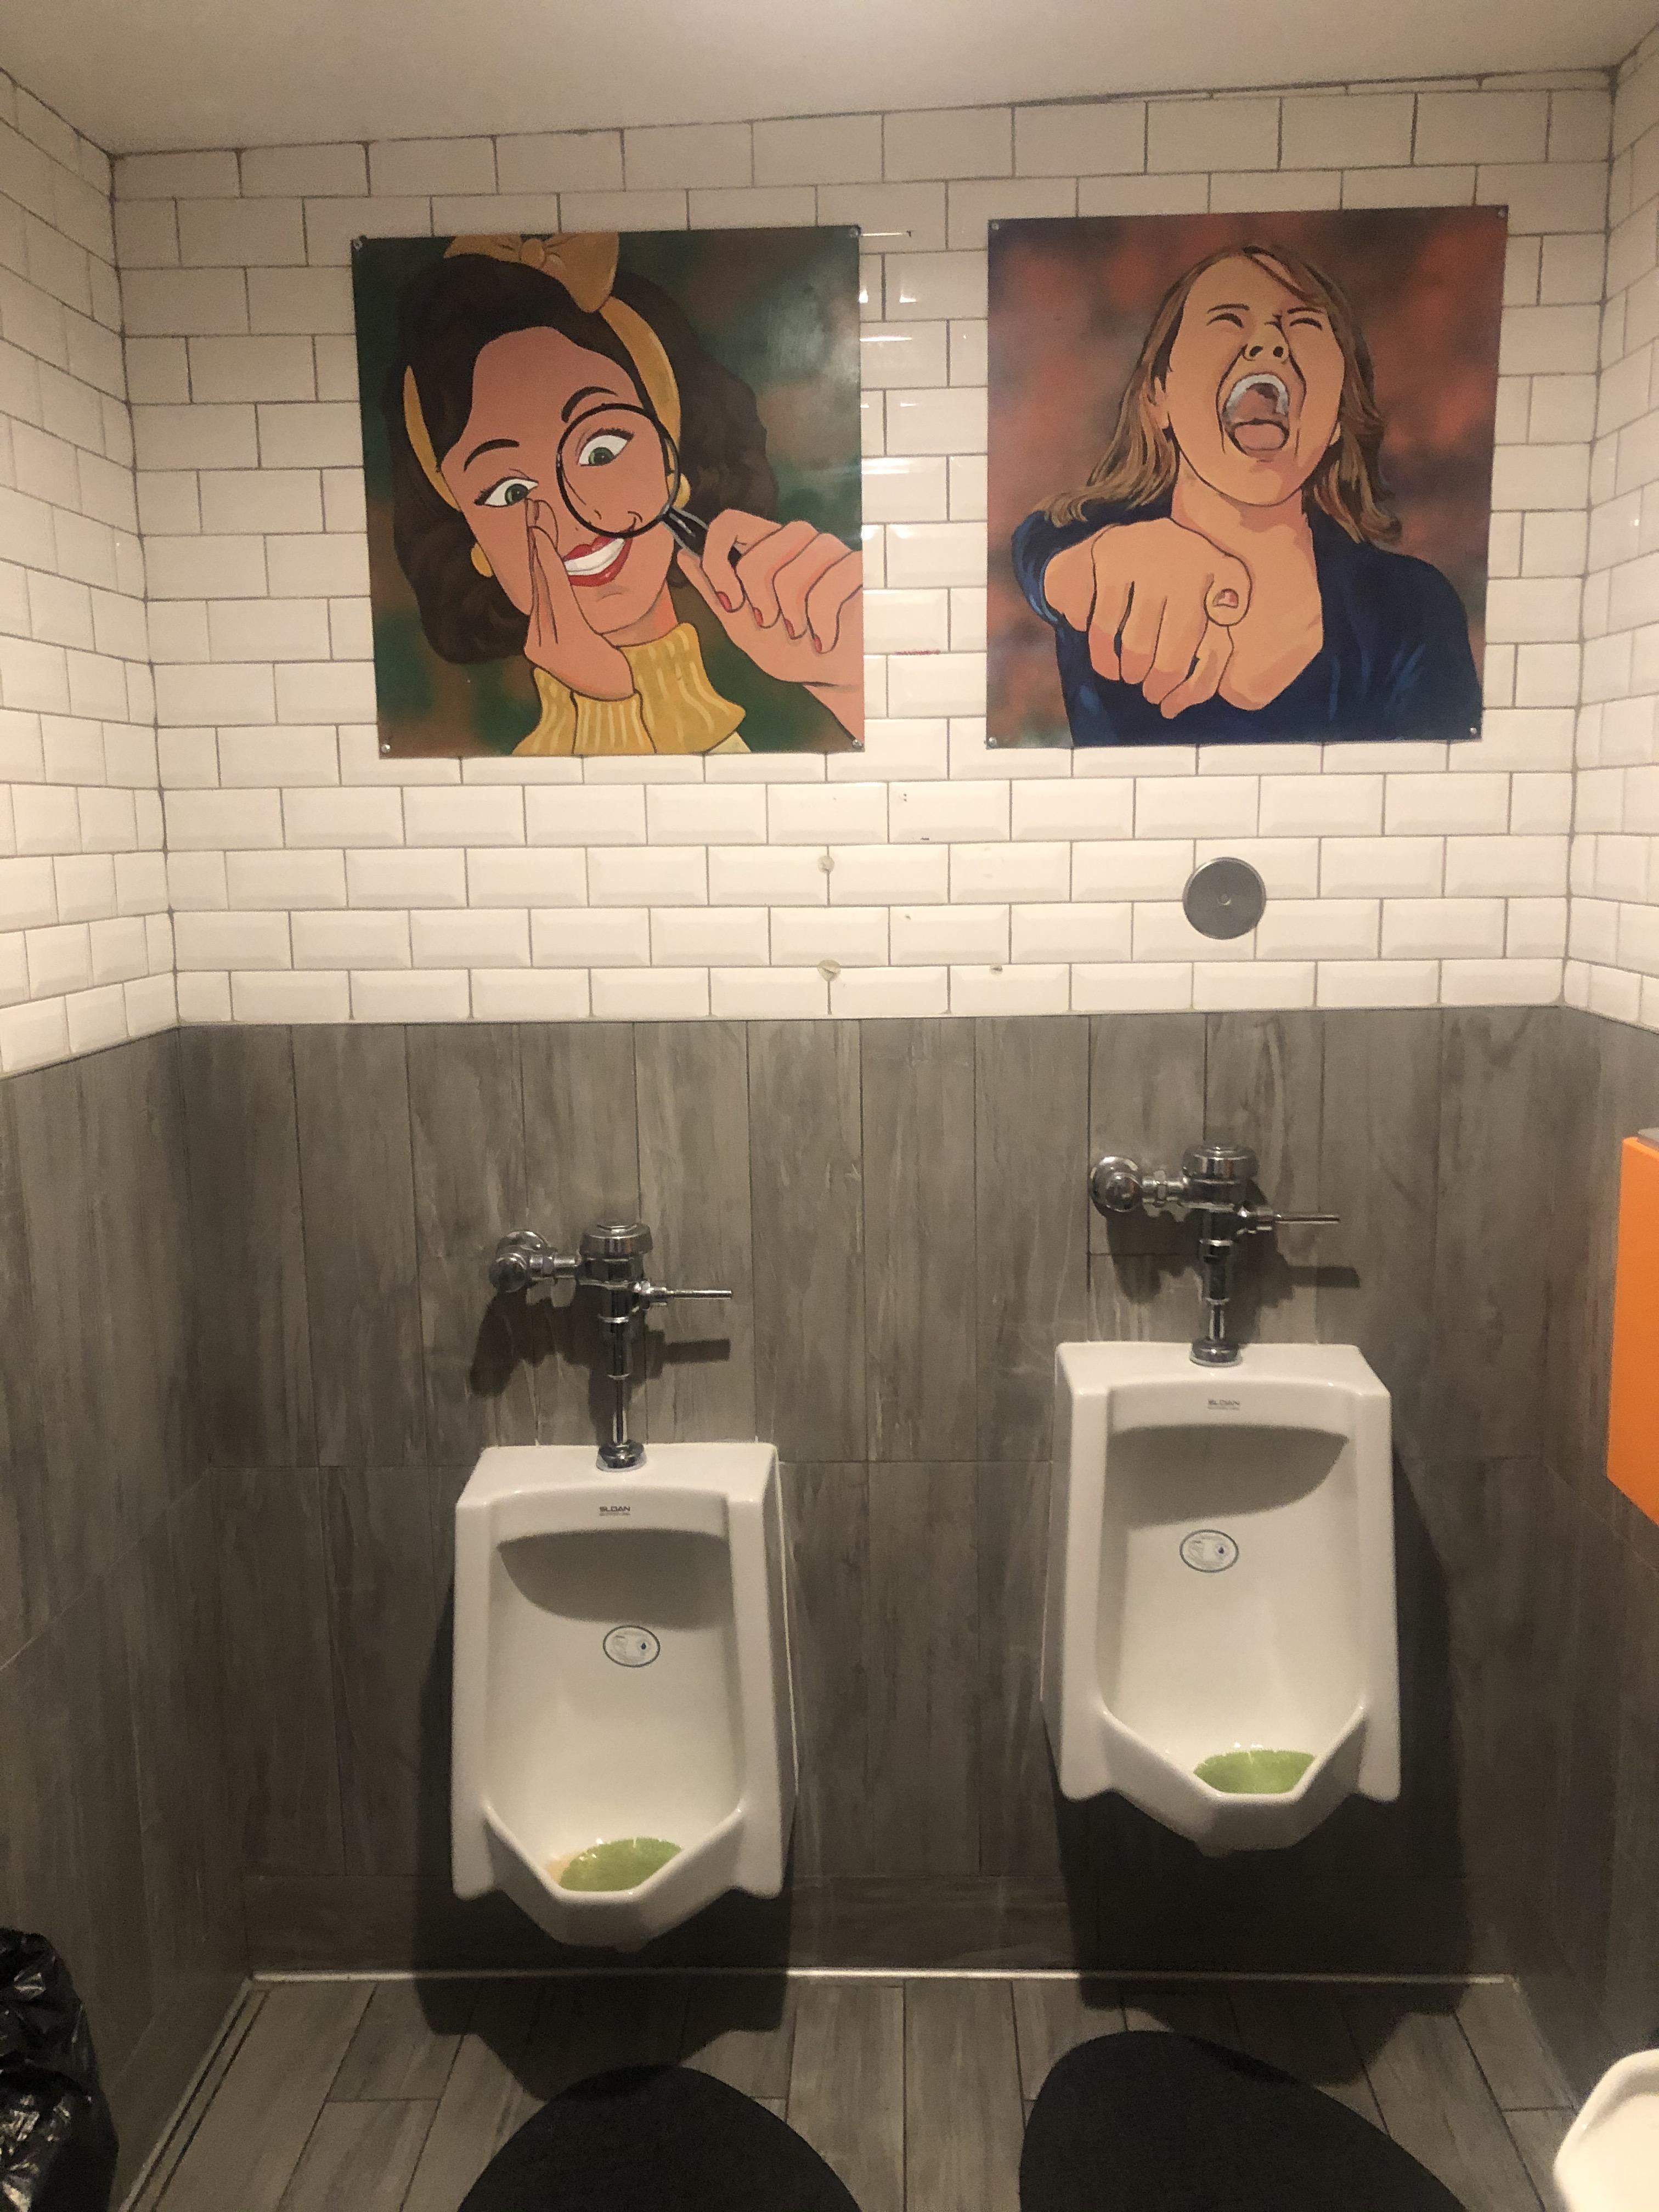 Dad made me go into the men’s restroom to see there art.